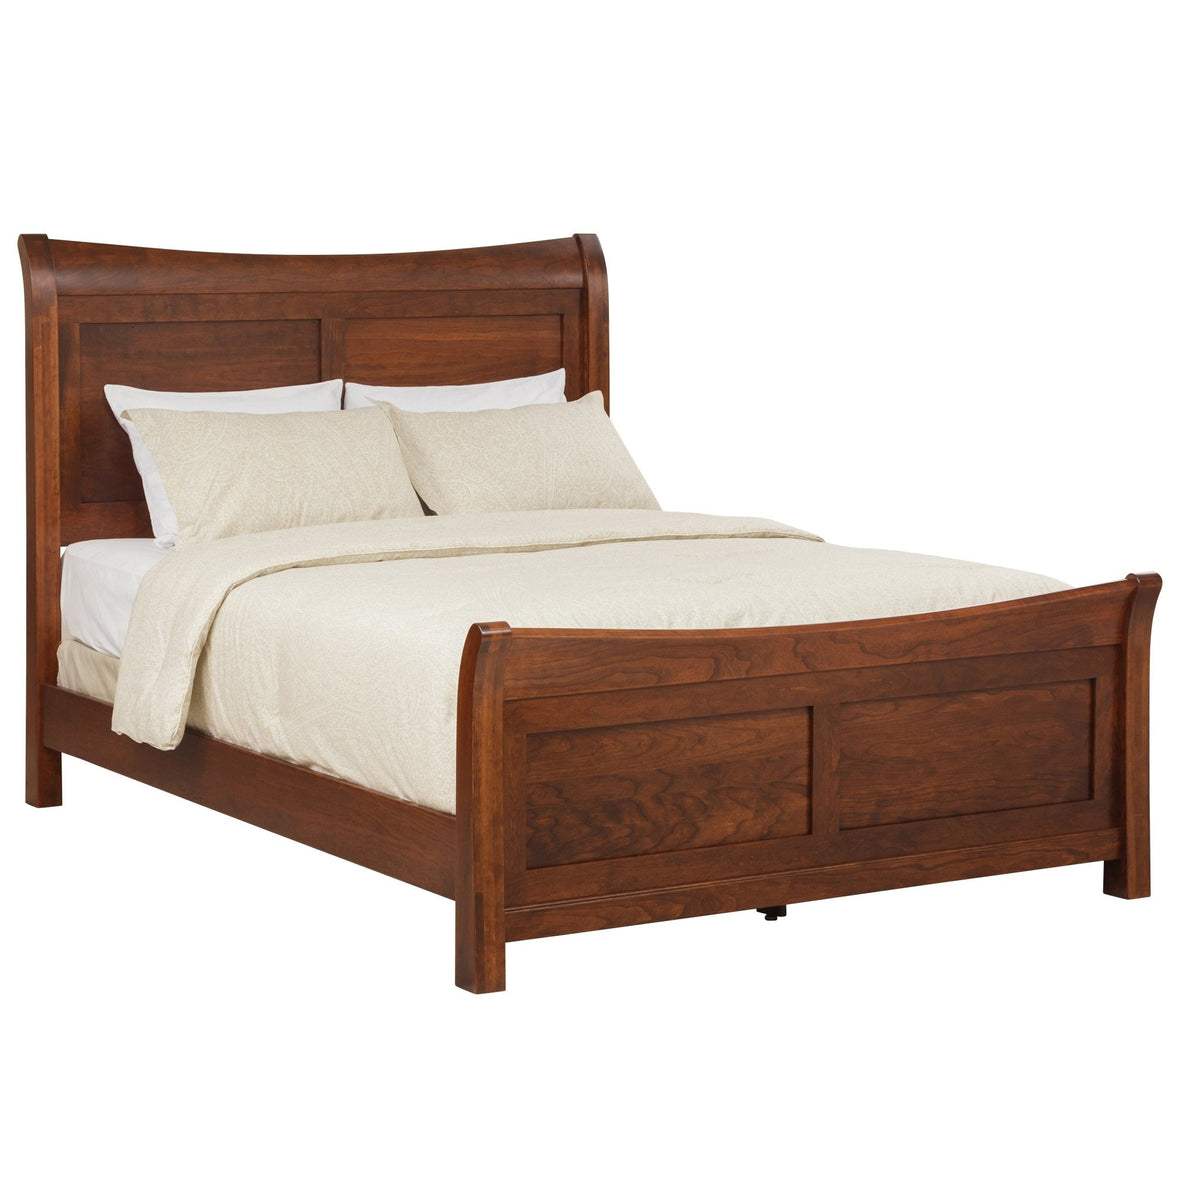 Amish Avondale 5pc Wood Sleigh Bedroom Set - snyders.furniture